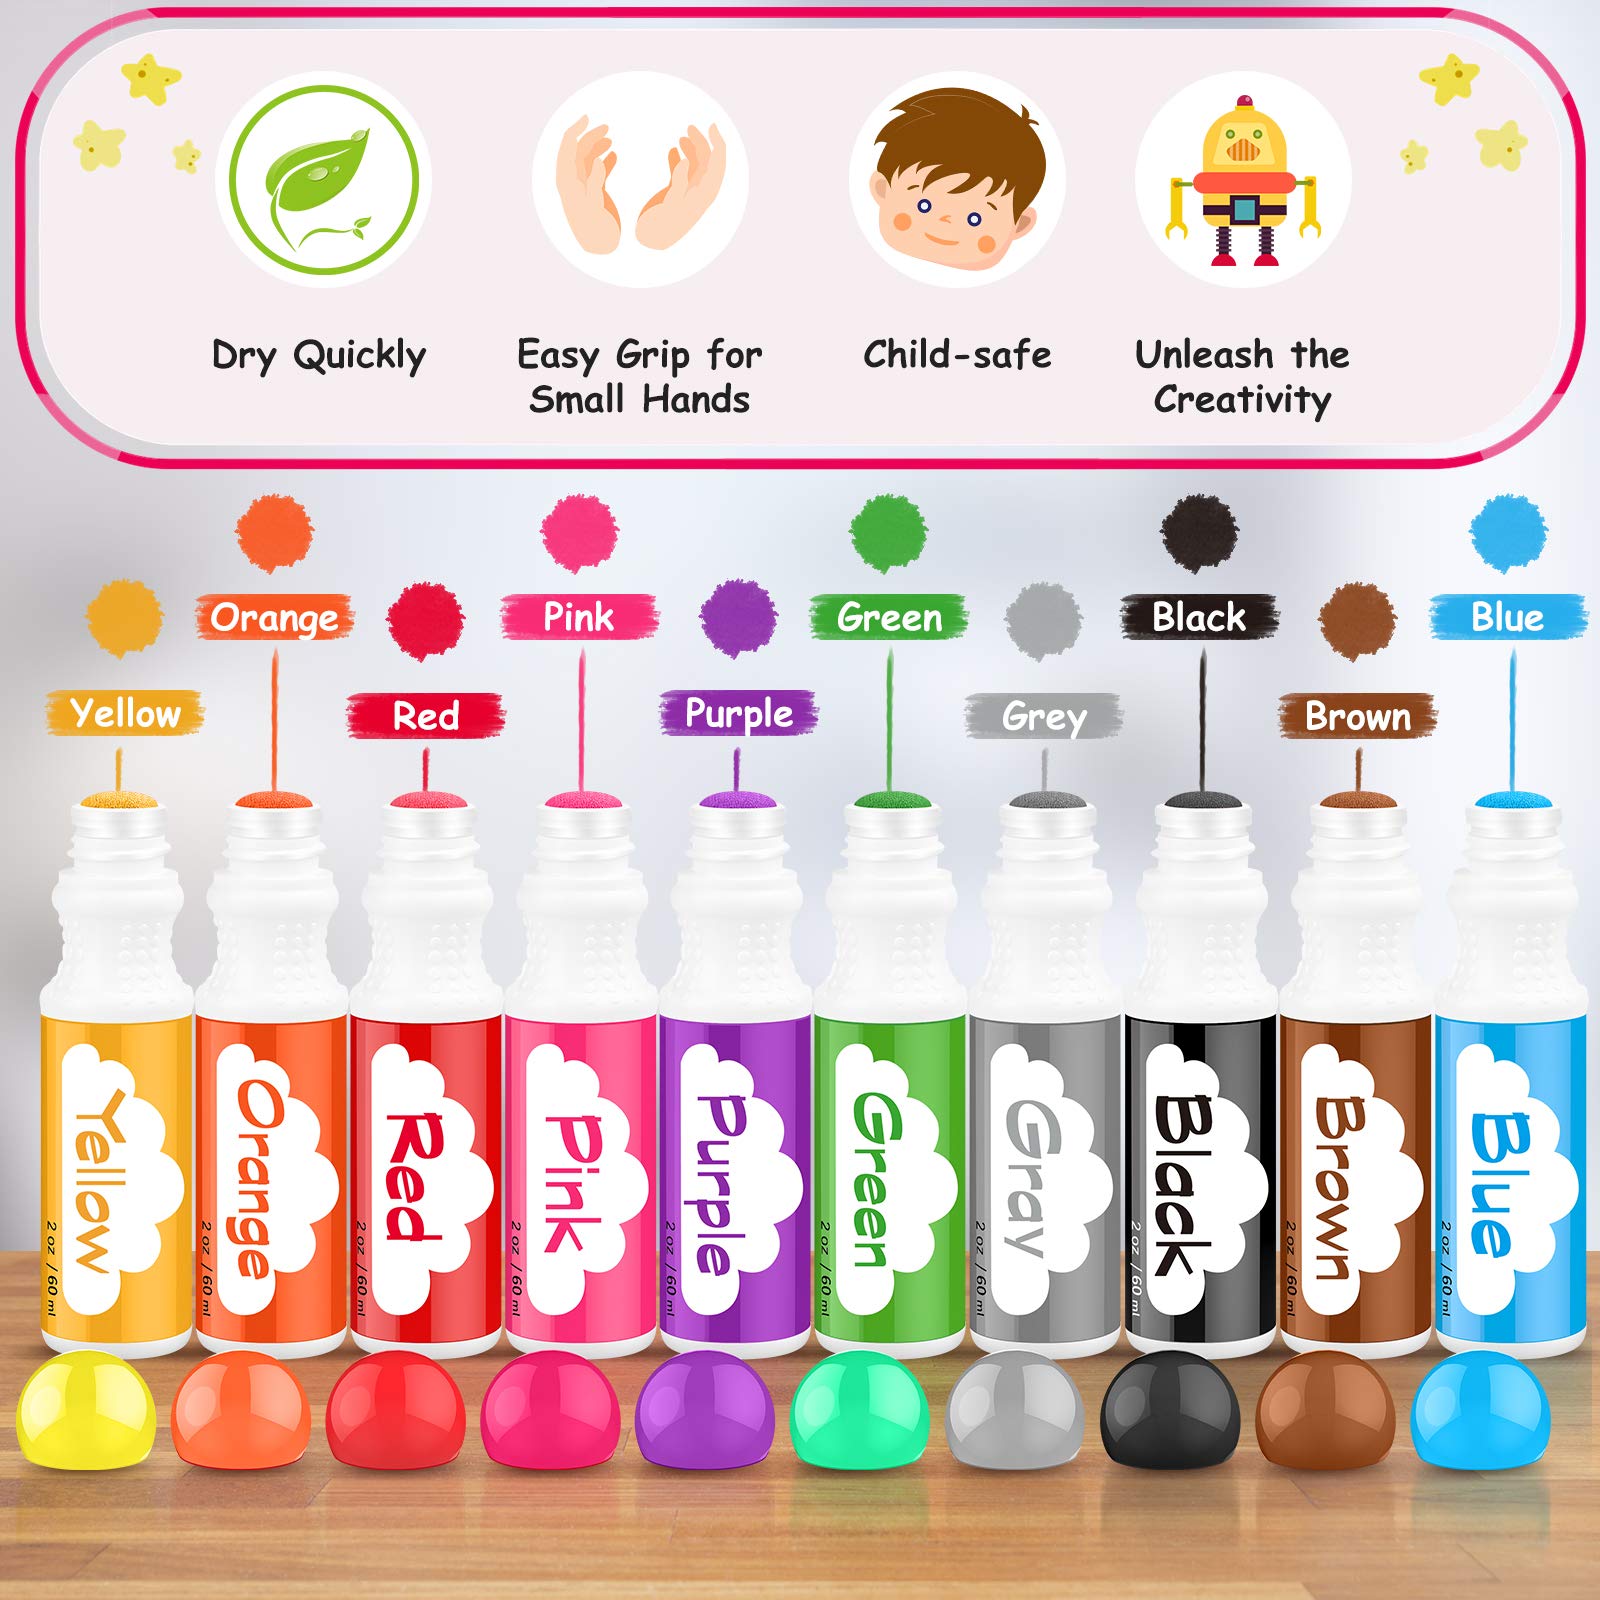 Washable Dot Markers for Toddlers Kids Preschool, 10 Colors 2 oz Kids Markers Set with 48 Pages Tearable Activity Book for Toddler Arts and Crafts Kits Supplies, Non-Toxic Water-Based Paint Dauber